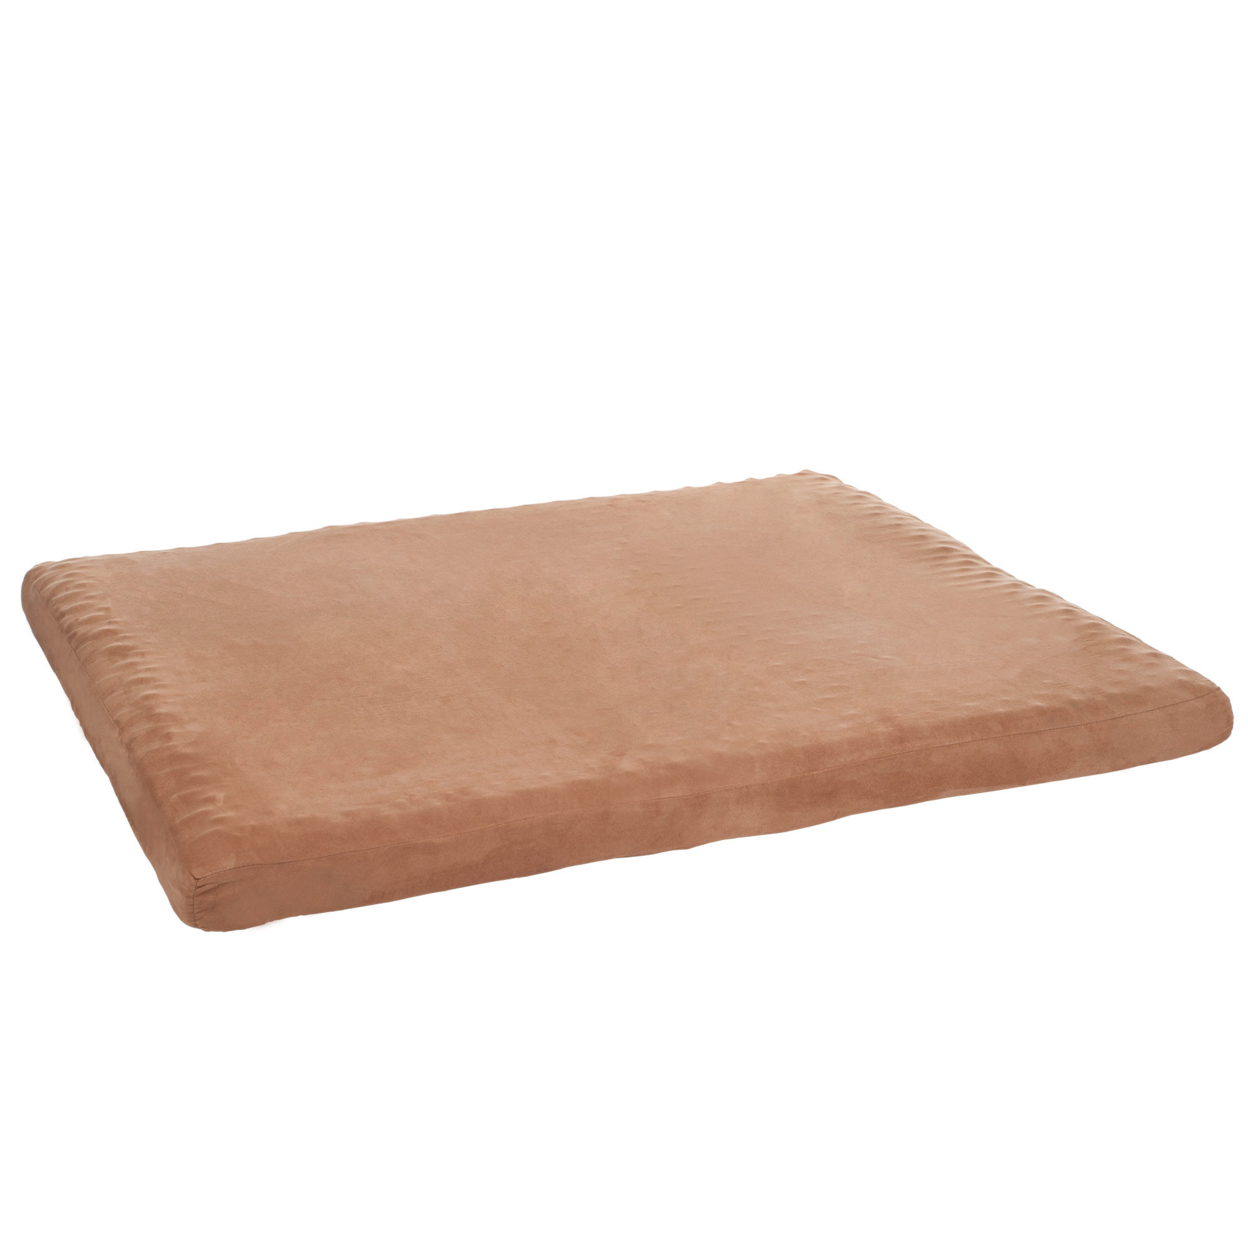 Large Dog Bed 35 X 44 Inch Zippered Washable Cover 3 Inch Foam Comfy Cozy Micro-suede Cover